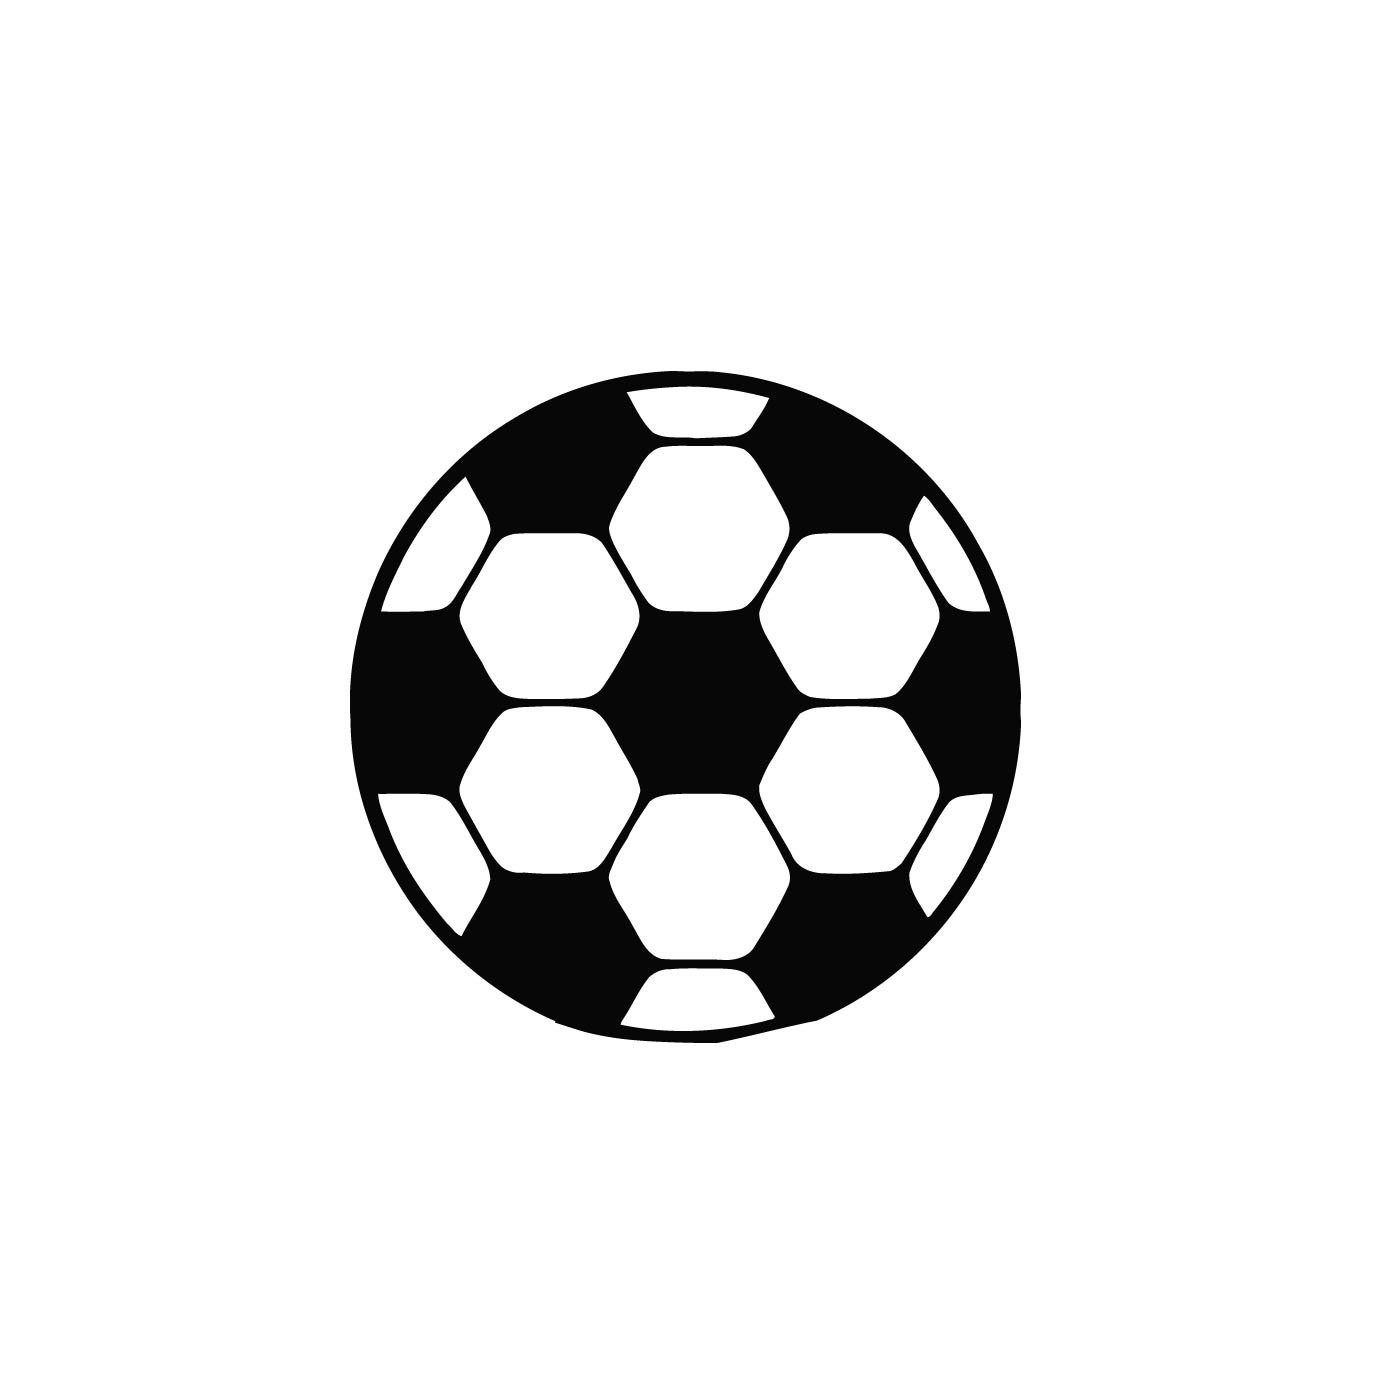 Soccer Ball Vinyl Wall Decal (BlackEasy to apply You will get the instructionDimensions 22 inches wide x 35 inches long )